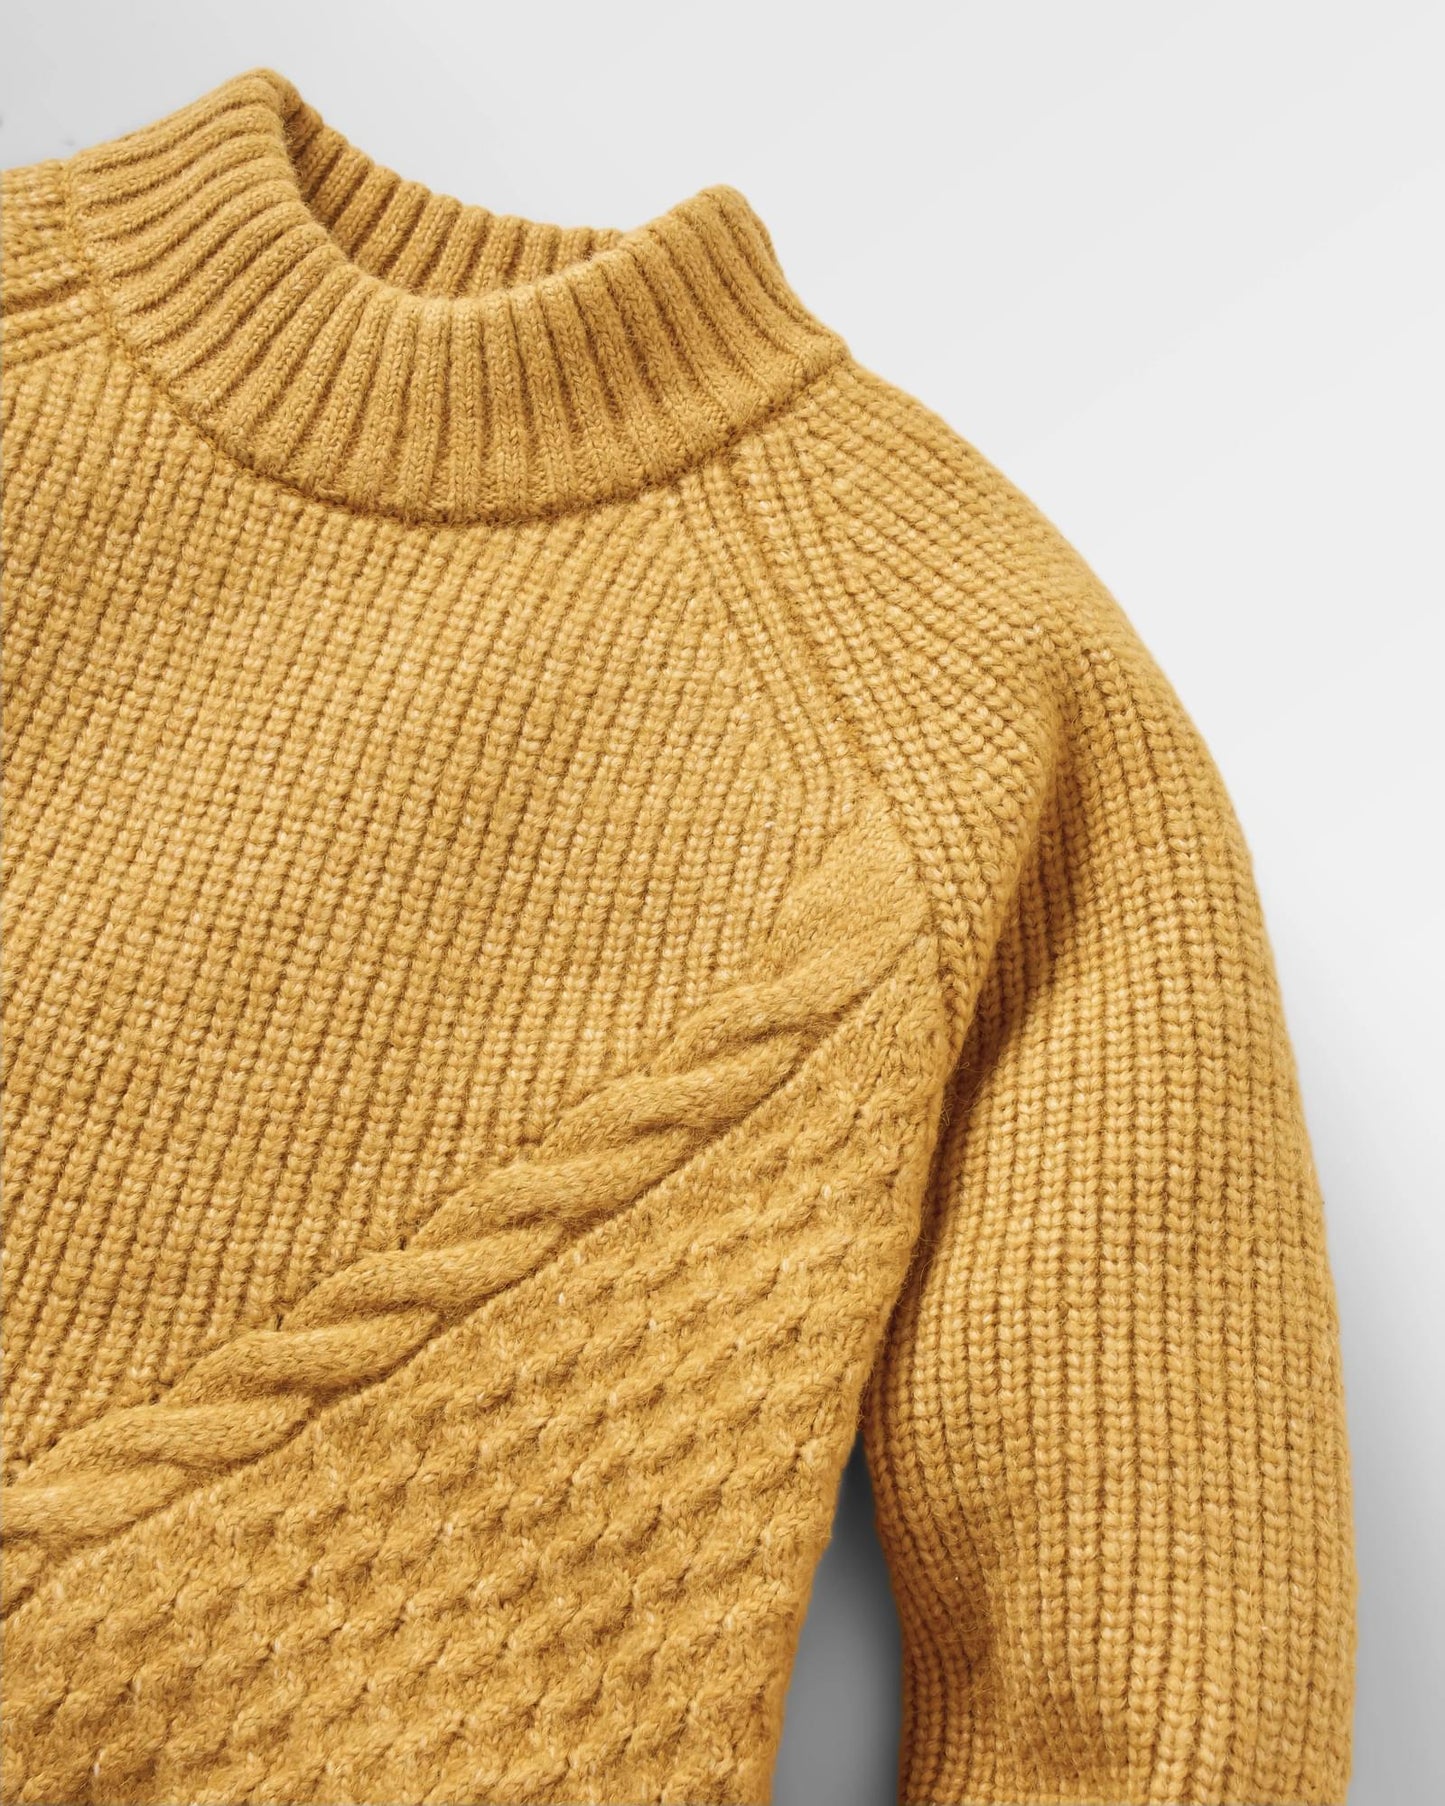 Cozy Cable Recycled Knitted Jumper - Mustard Gold